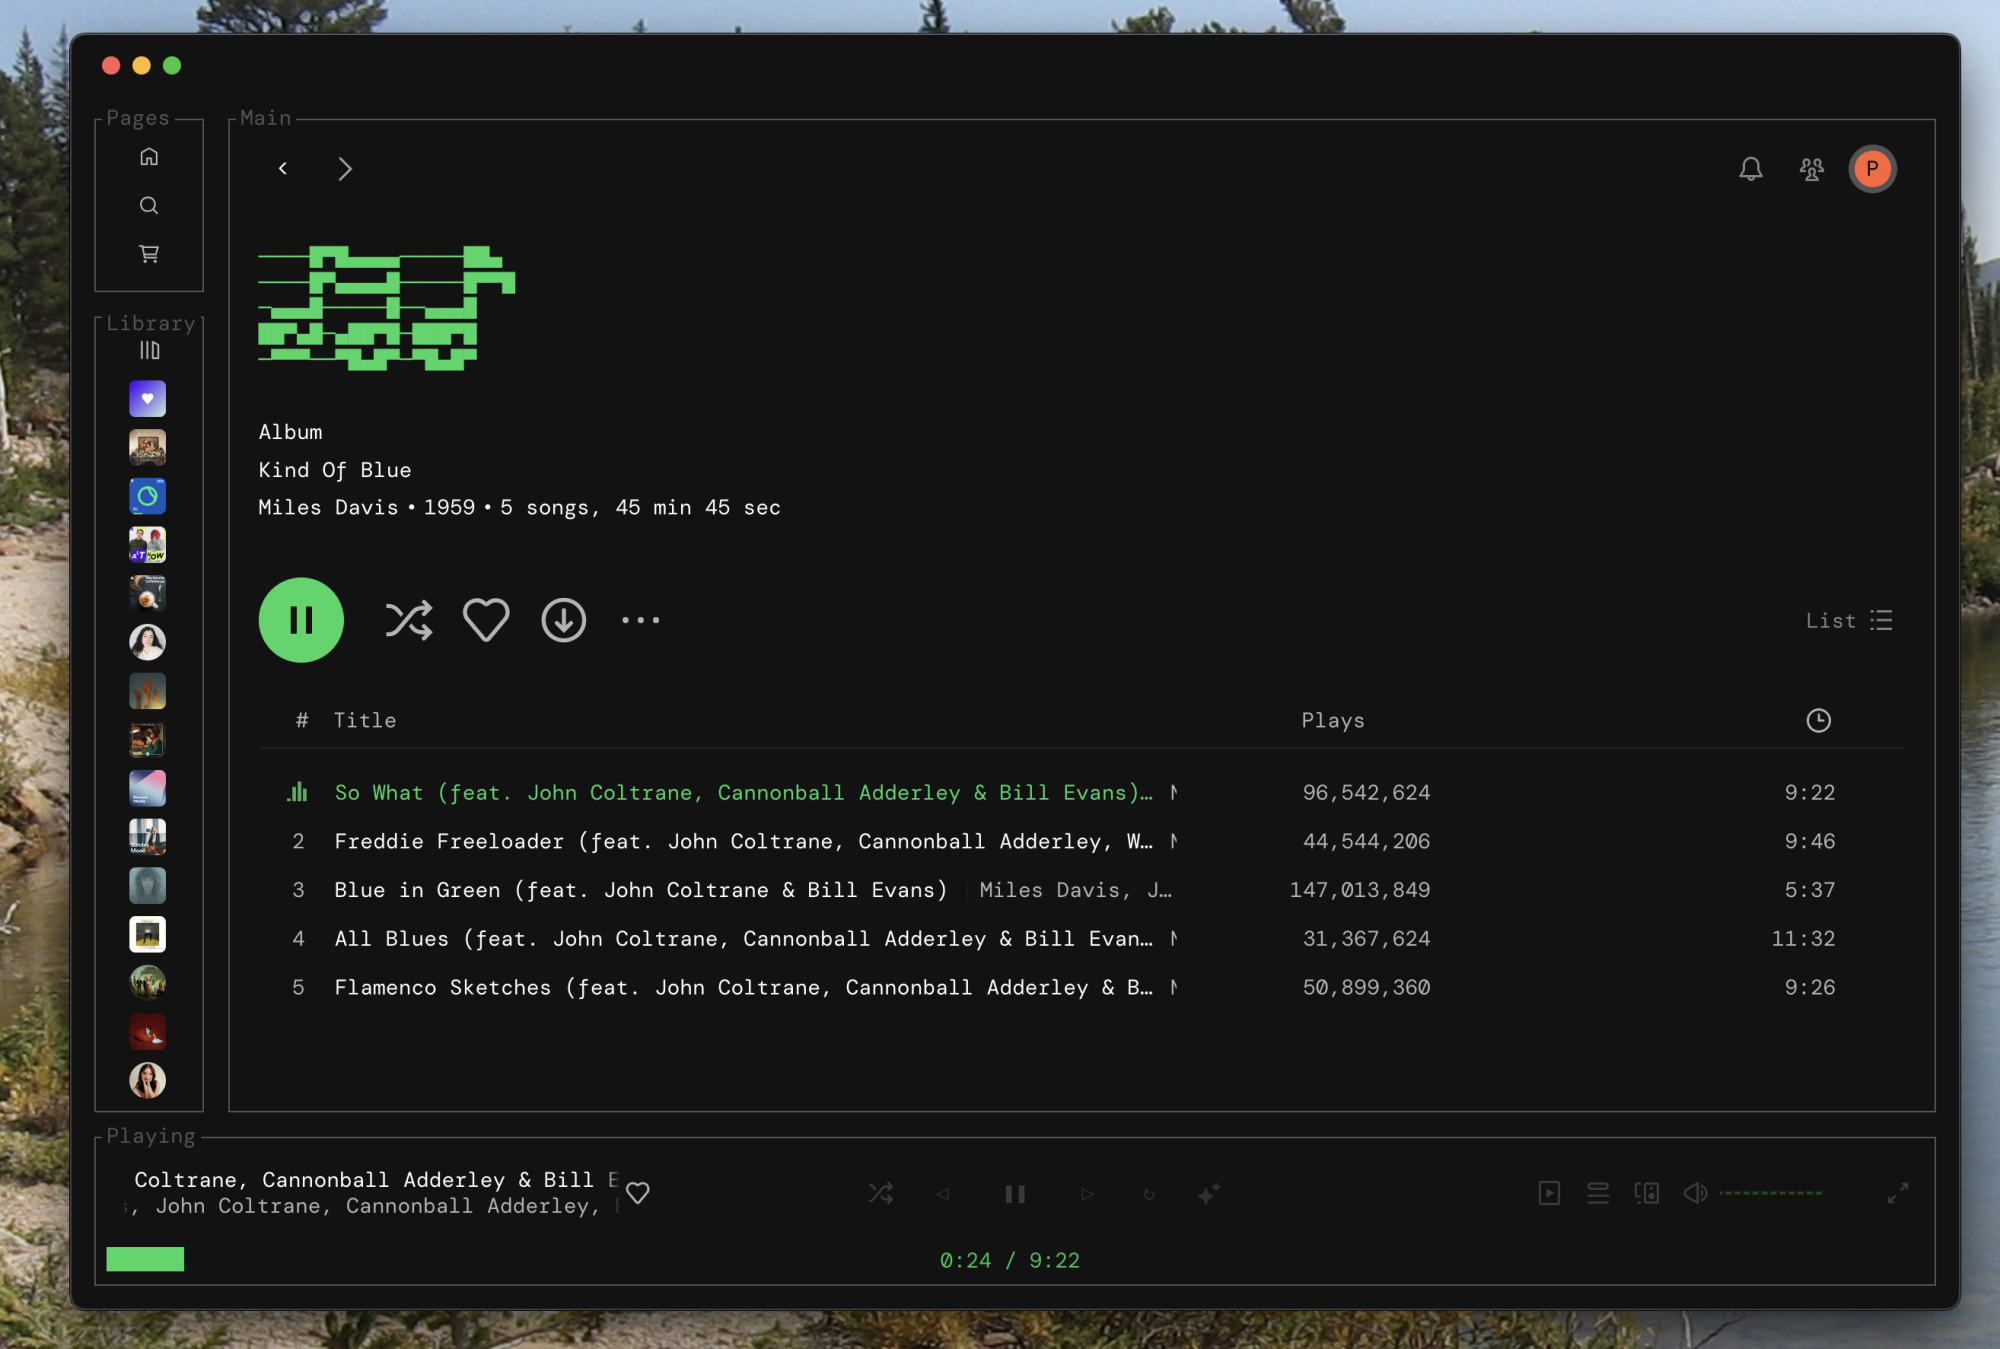 Spotify but it looks like a command line app for some reason